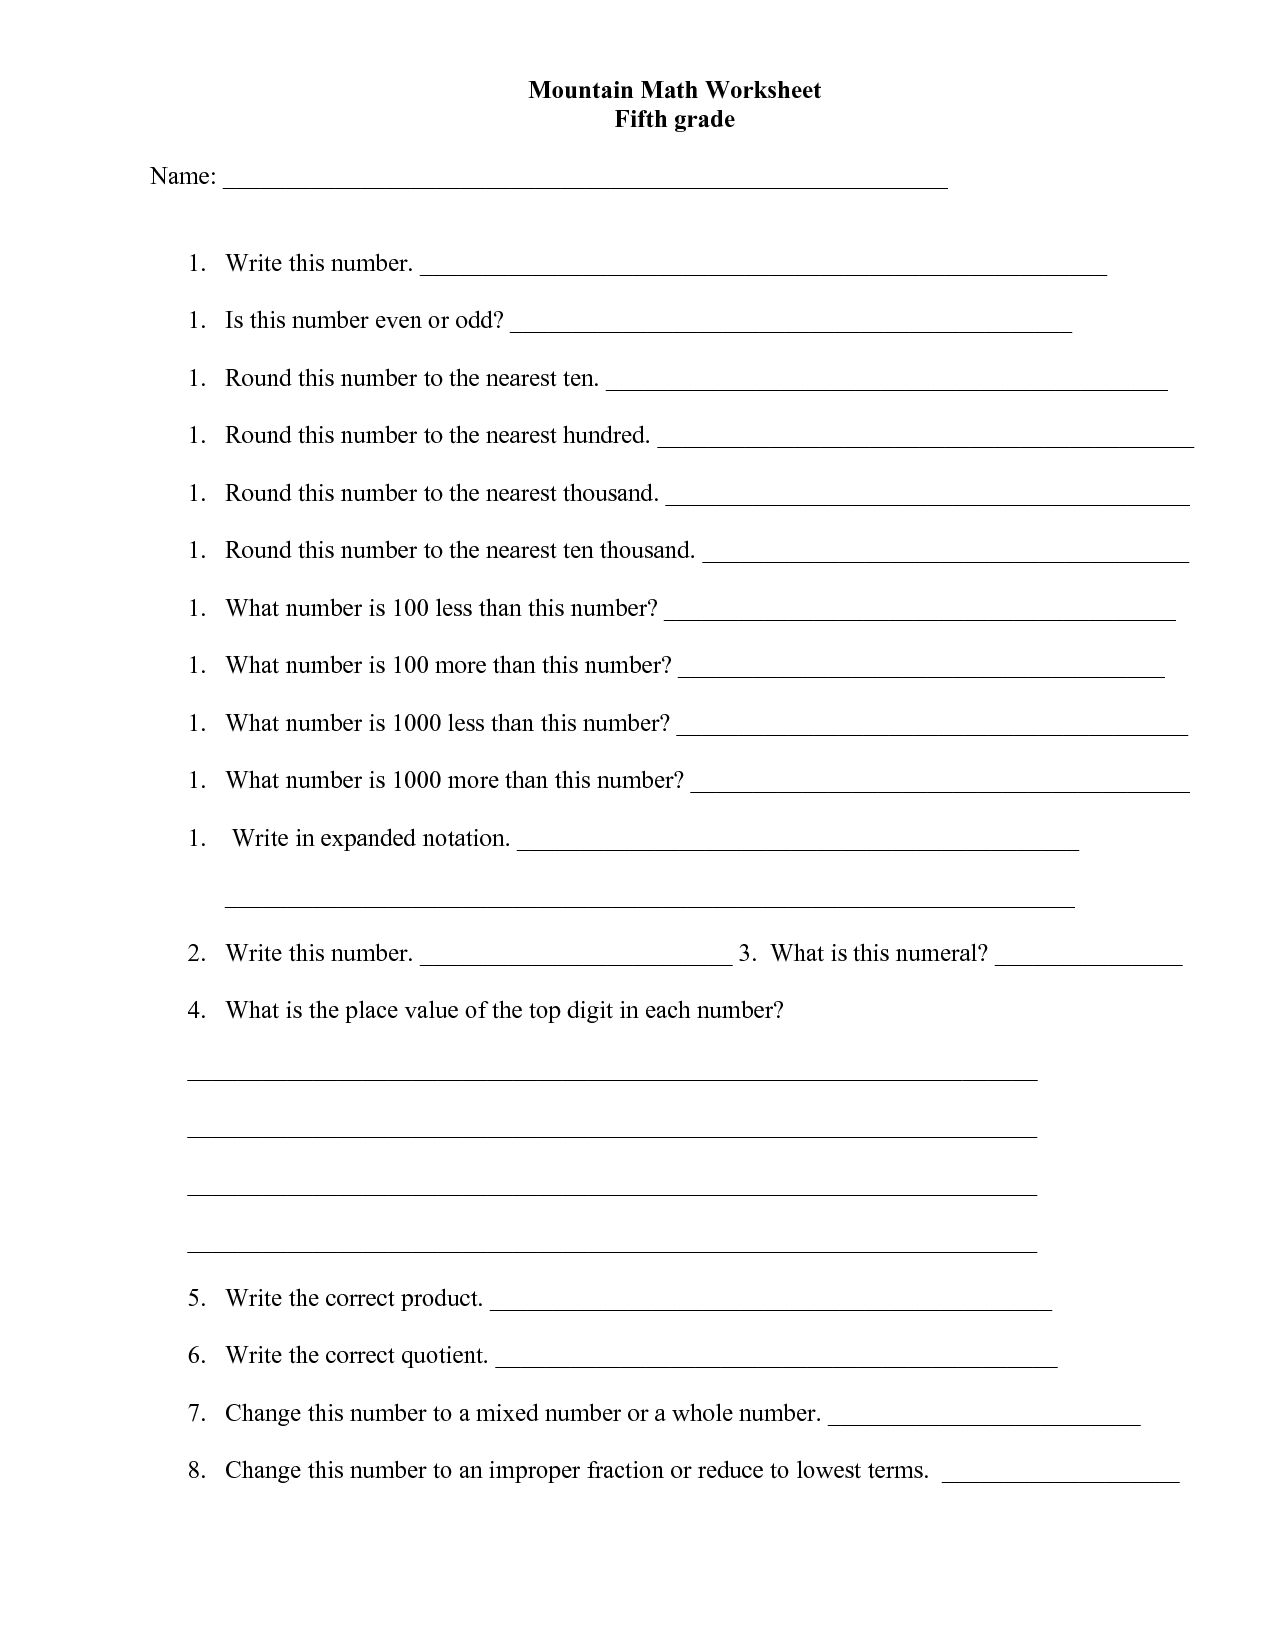 15 Best Images Of Mountain Math Worksheet 4th Grade Mountain Math Worksheet 5th Grade